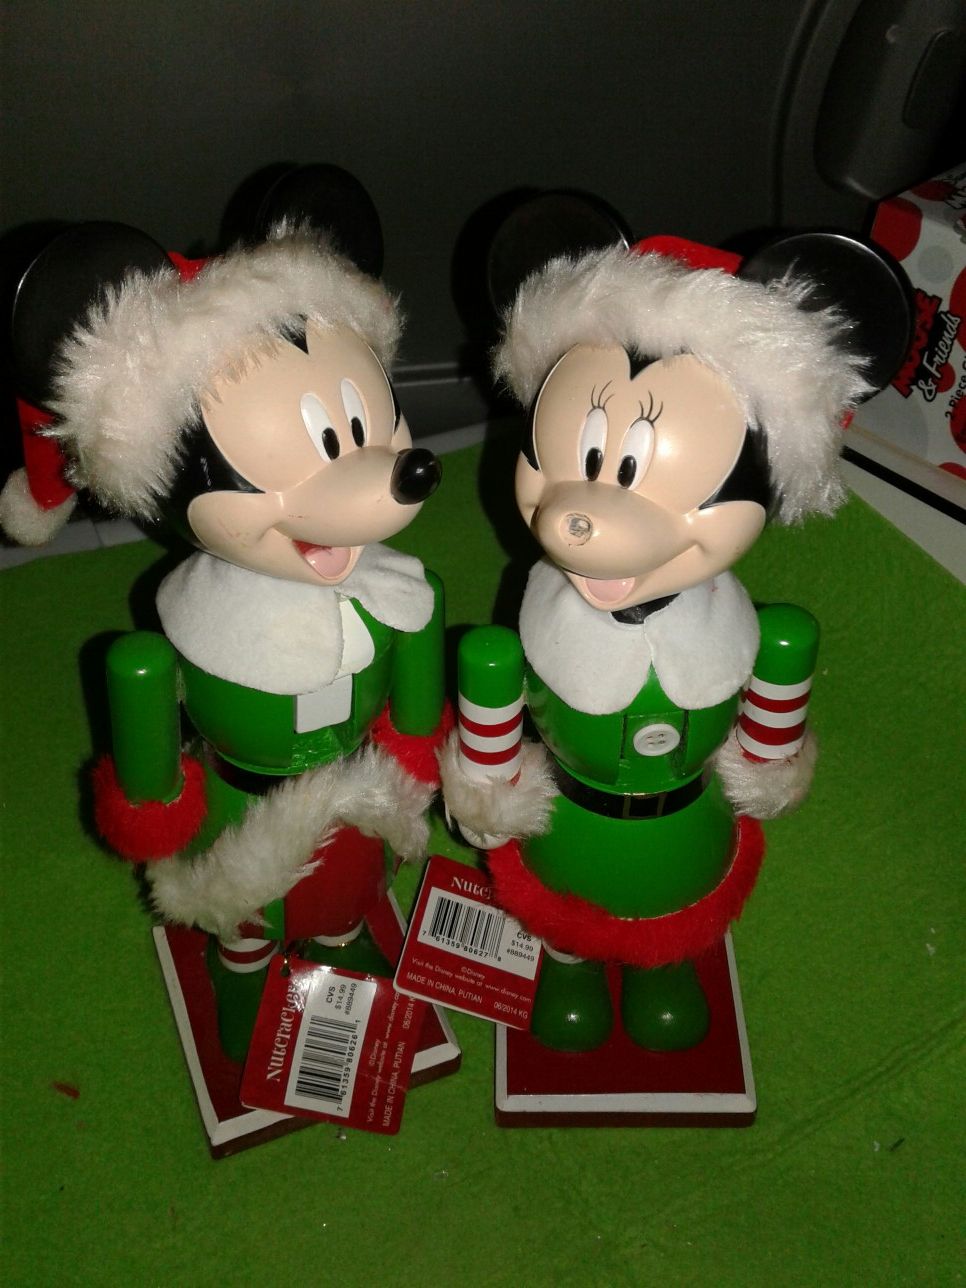 NUCCRACKER CHRISTMAS MICKEY MINNIE NEW WITH TAGS SHE IS JUST MISING THE NOSE IS REPARABLE EASY FINDING LITTLE BLACK BALL AND GLUING IT,